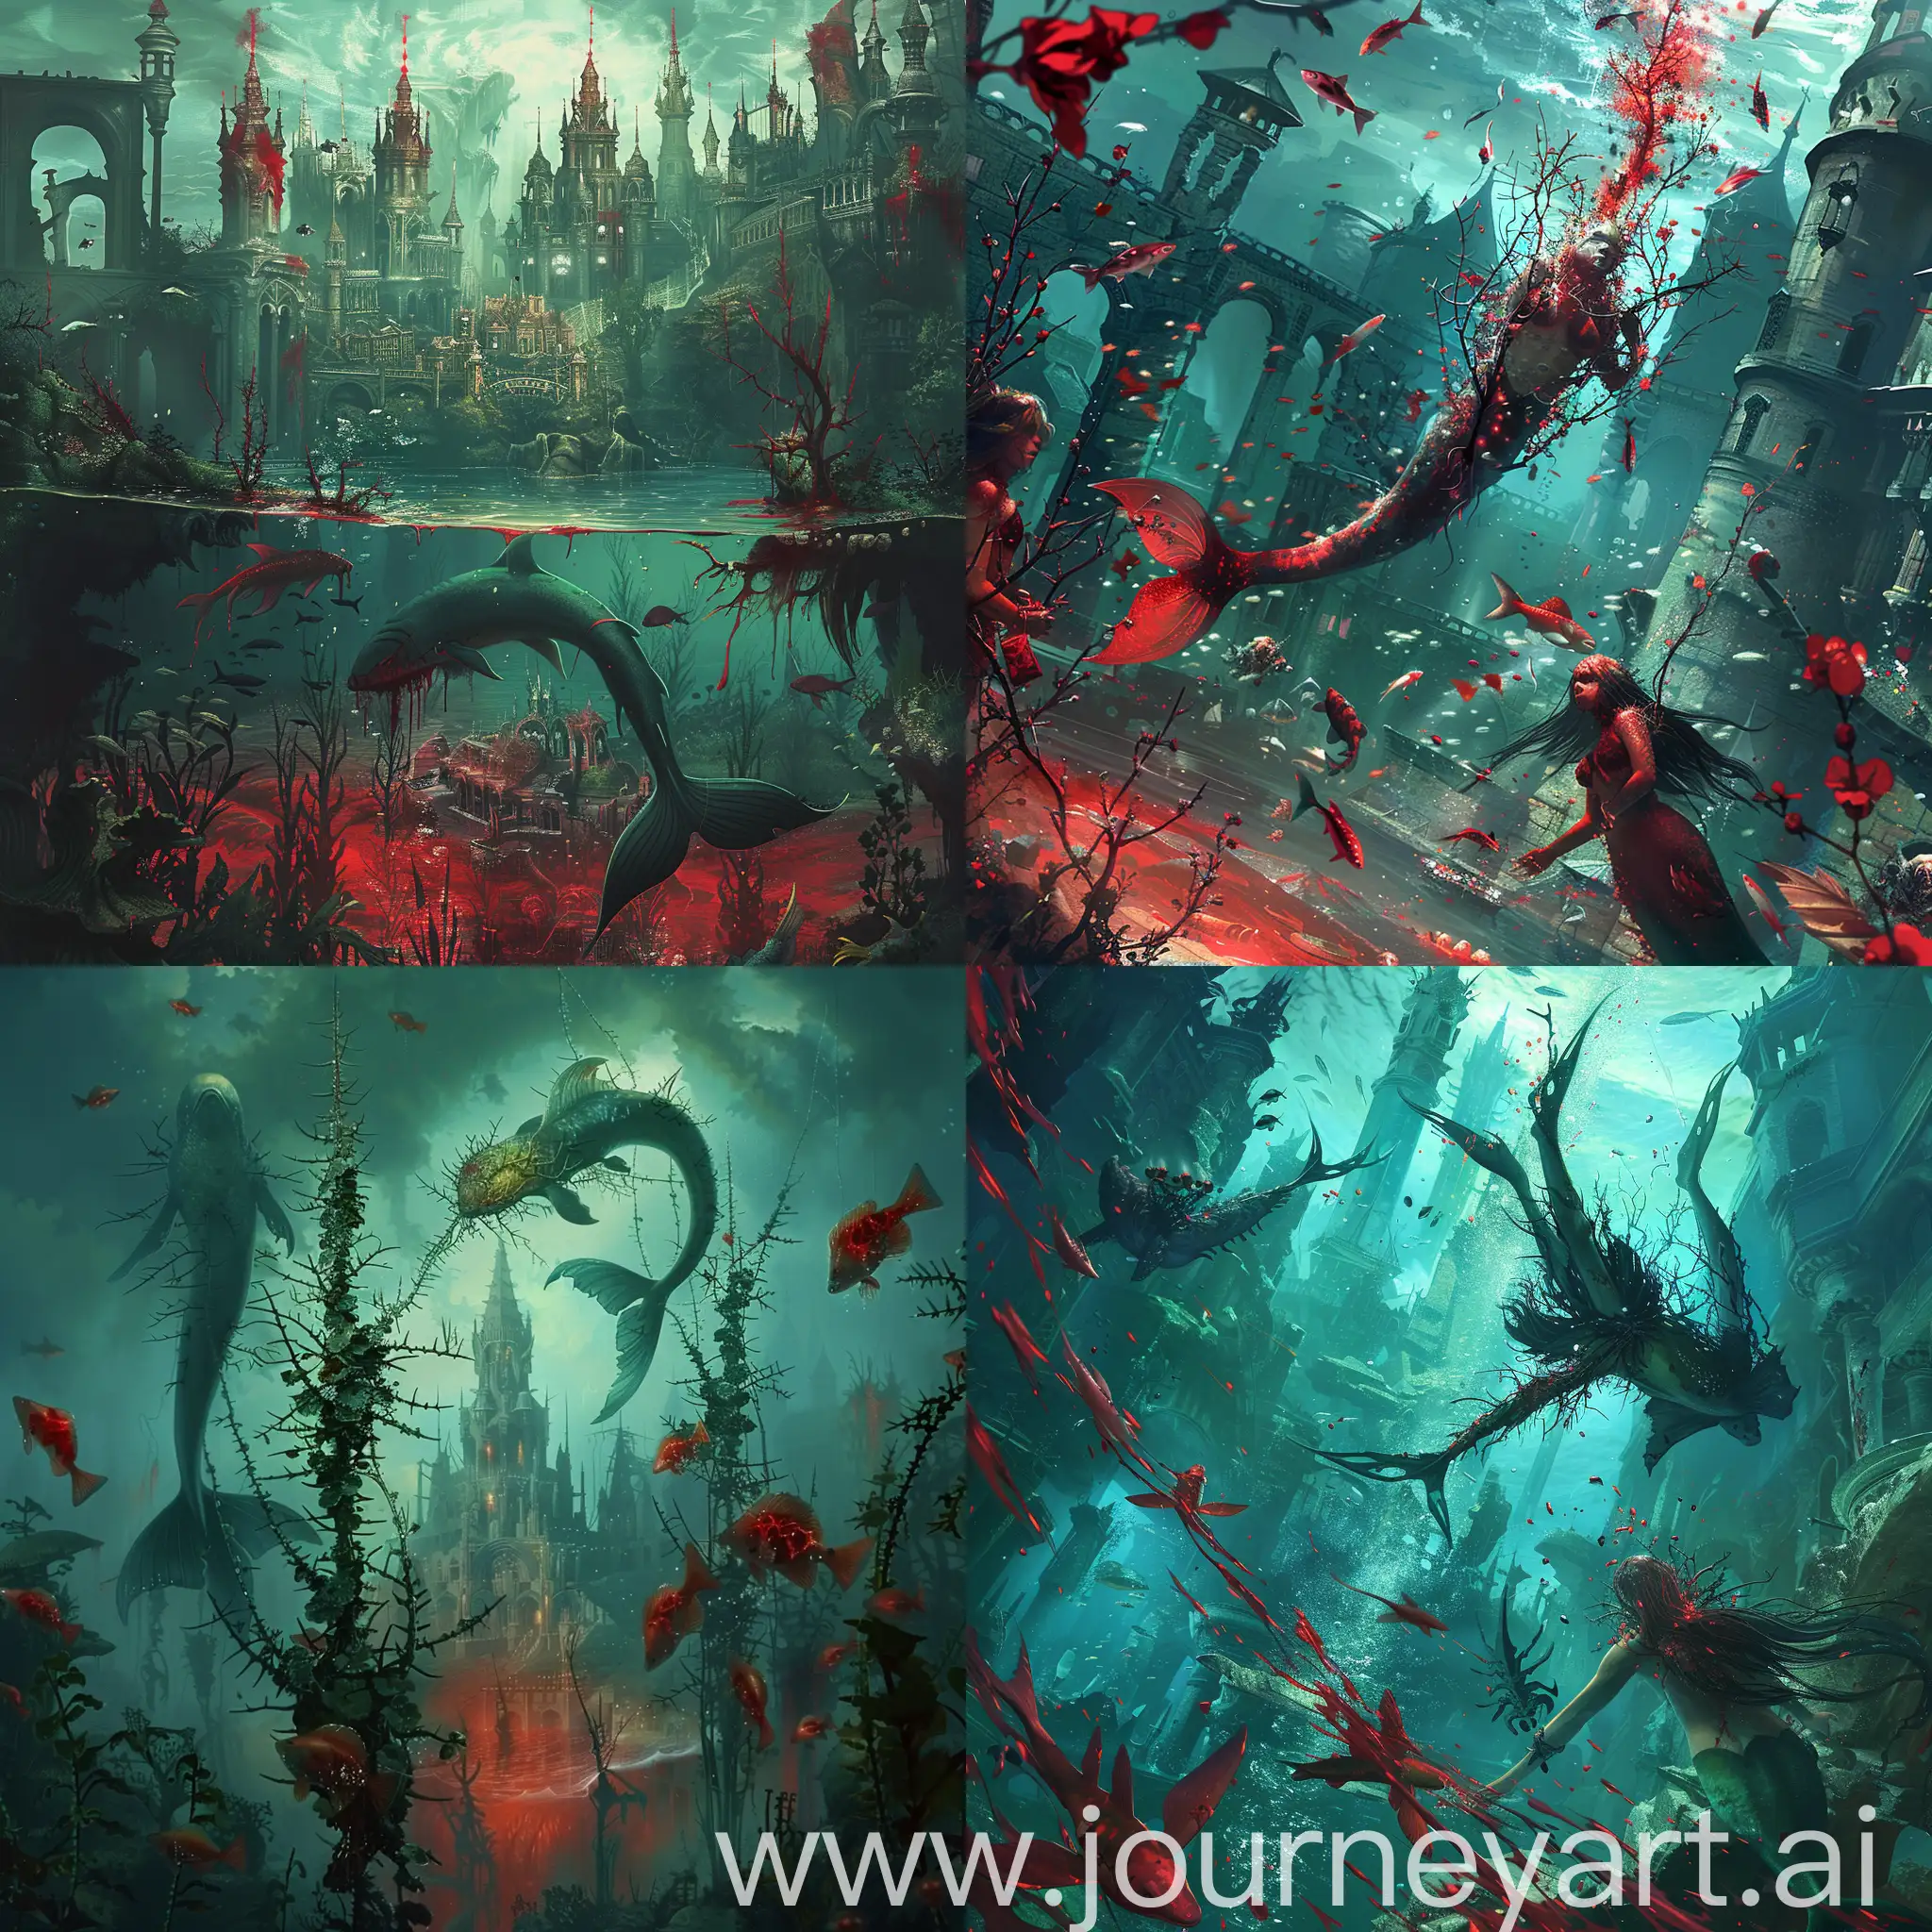 Underwater-City-in-Peril-Mermaids-and-Fish-Amidst-Thorny-Chaos